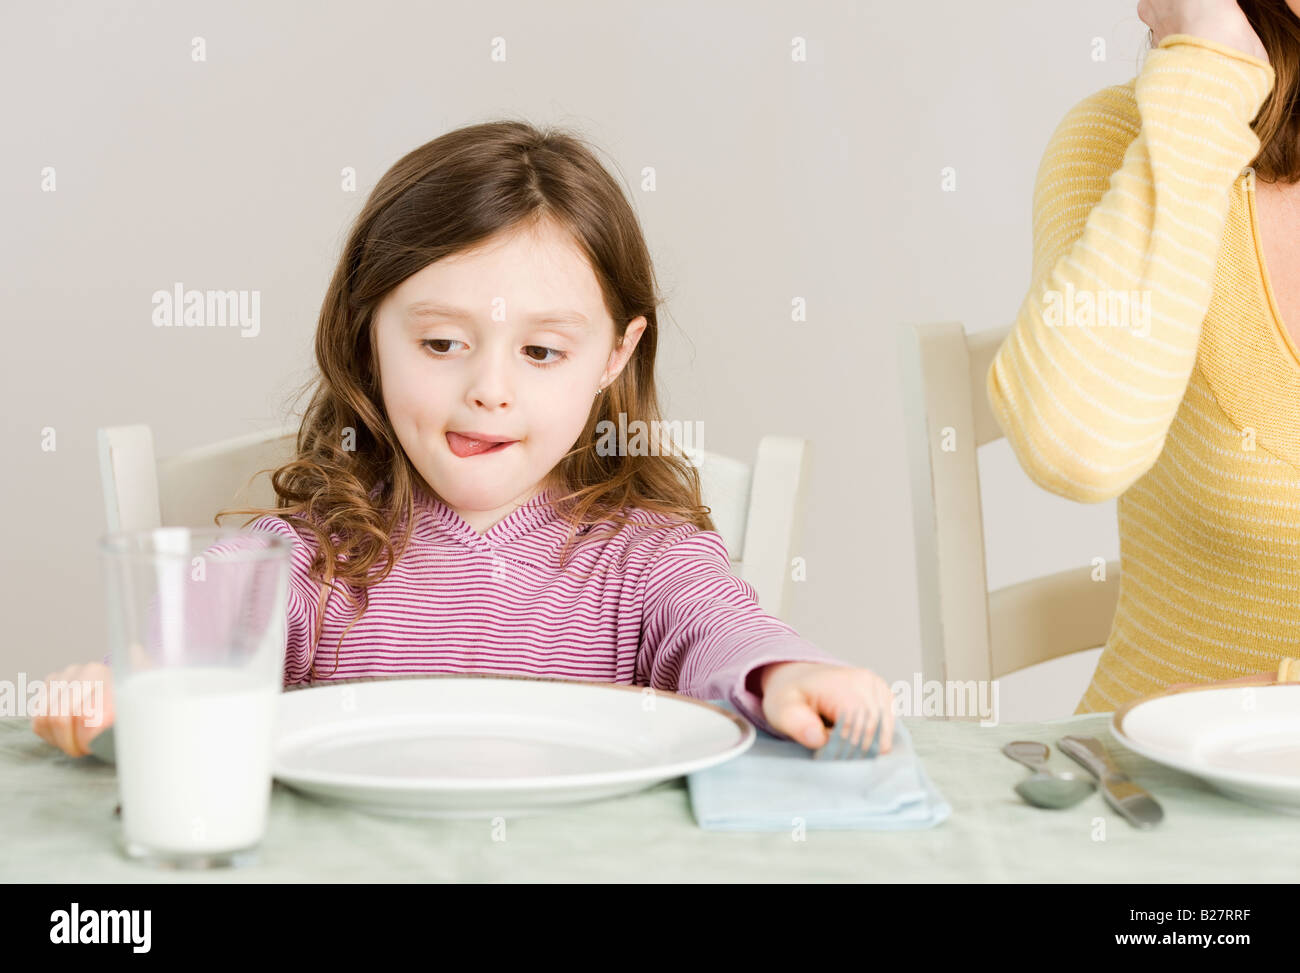 Girl sitting at dinner table Stock Photo